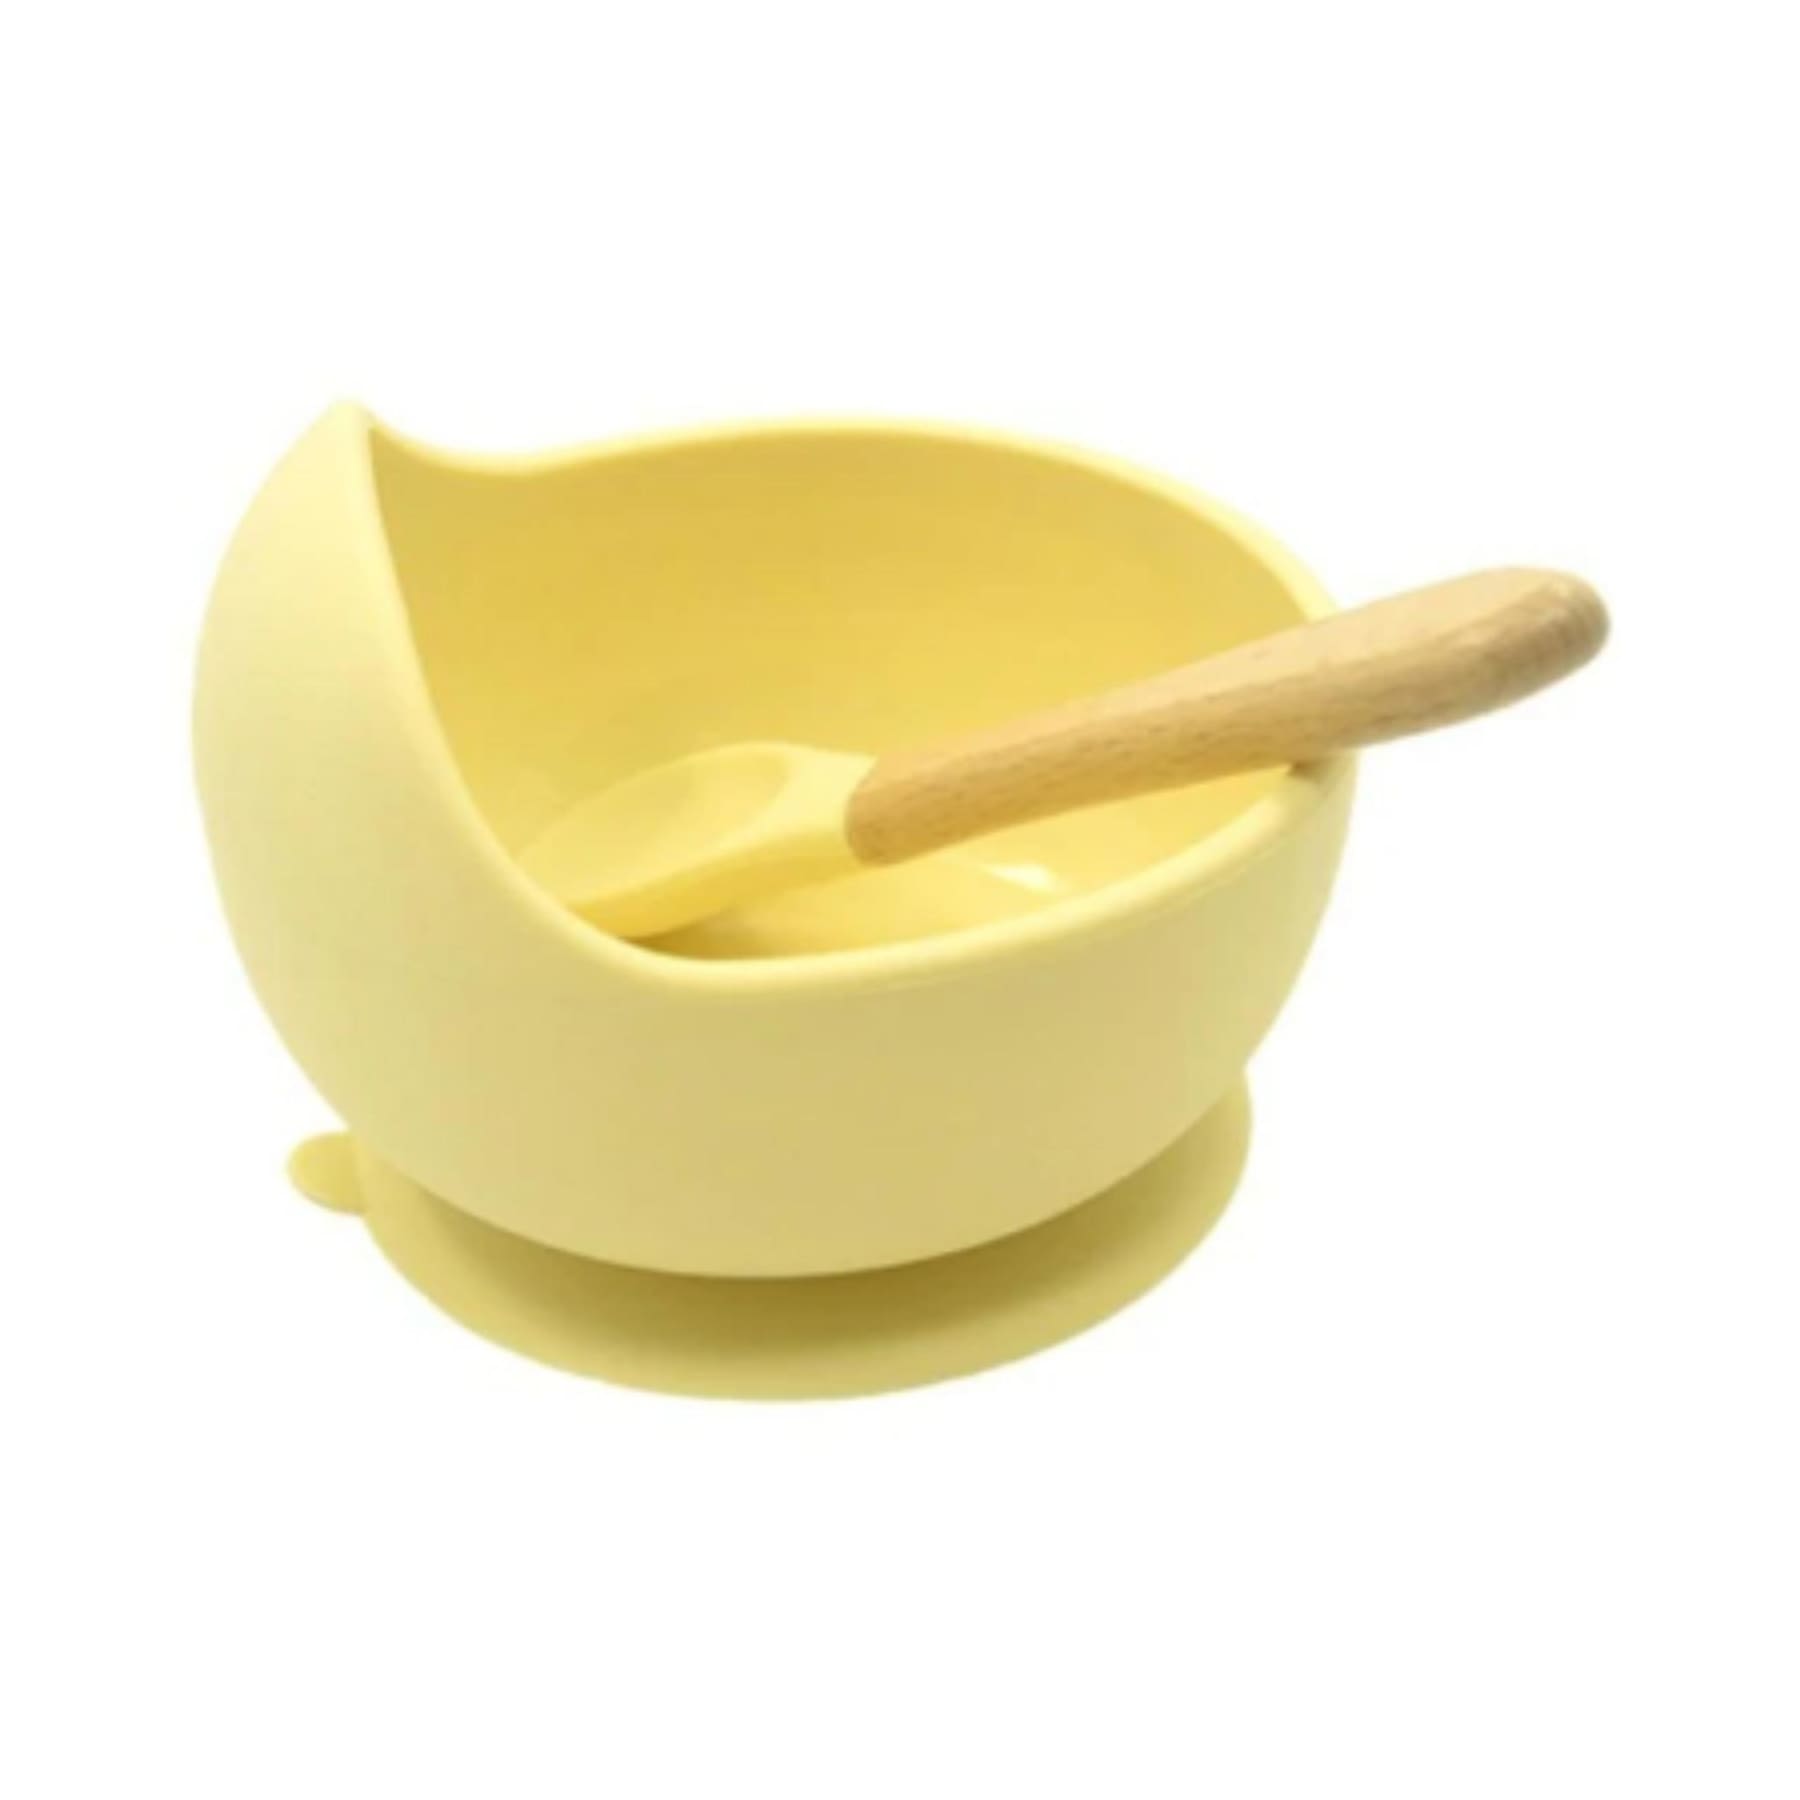 Yellow silicone bowl with suction base for baby feeding, tableware | Hunny Bubba Kids 